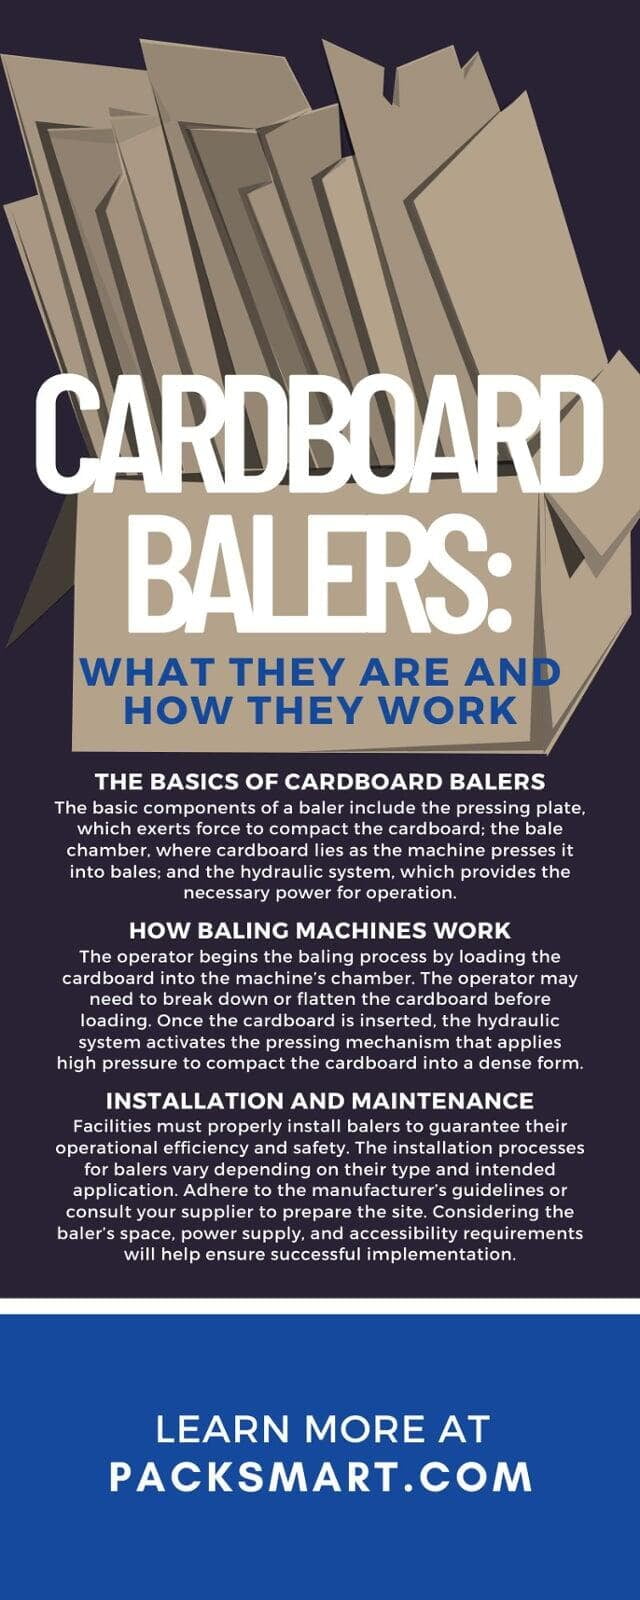 Cardboard Balers: What They Are and How They Work